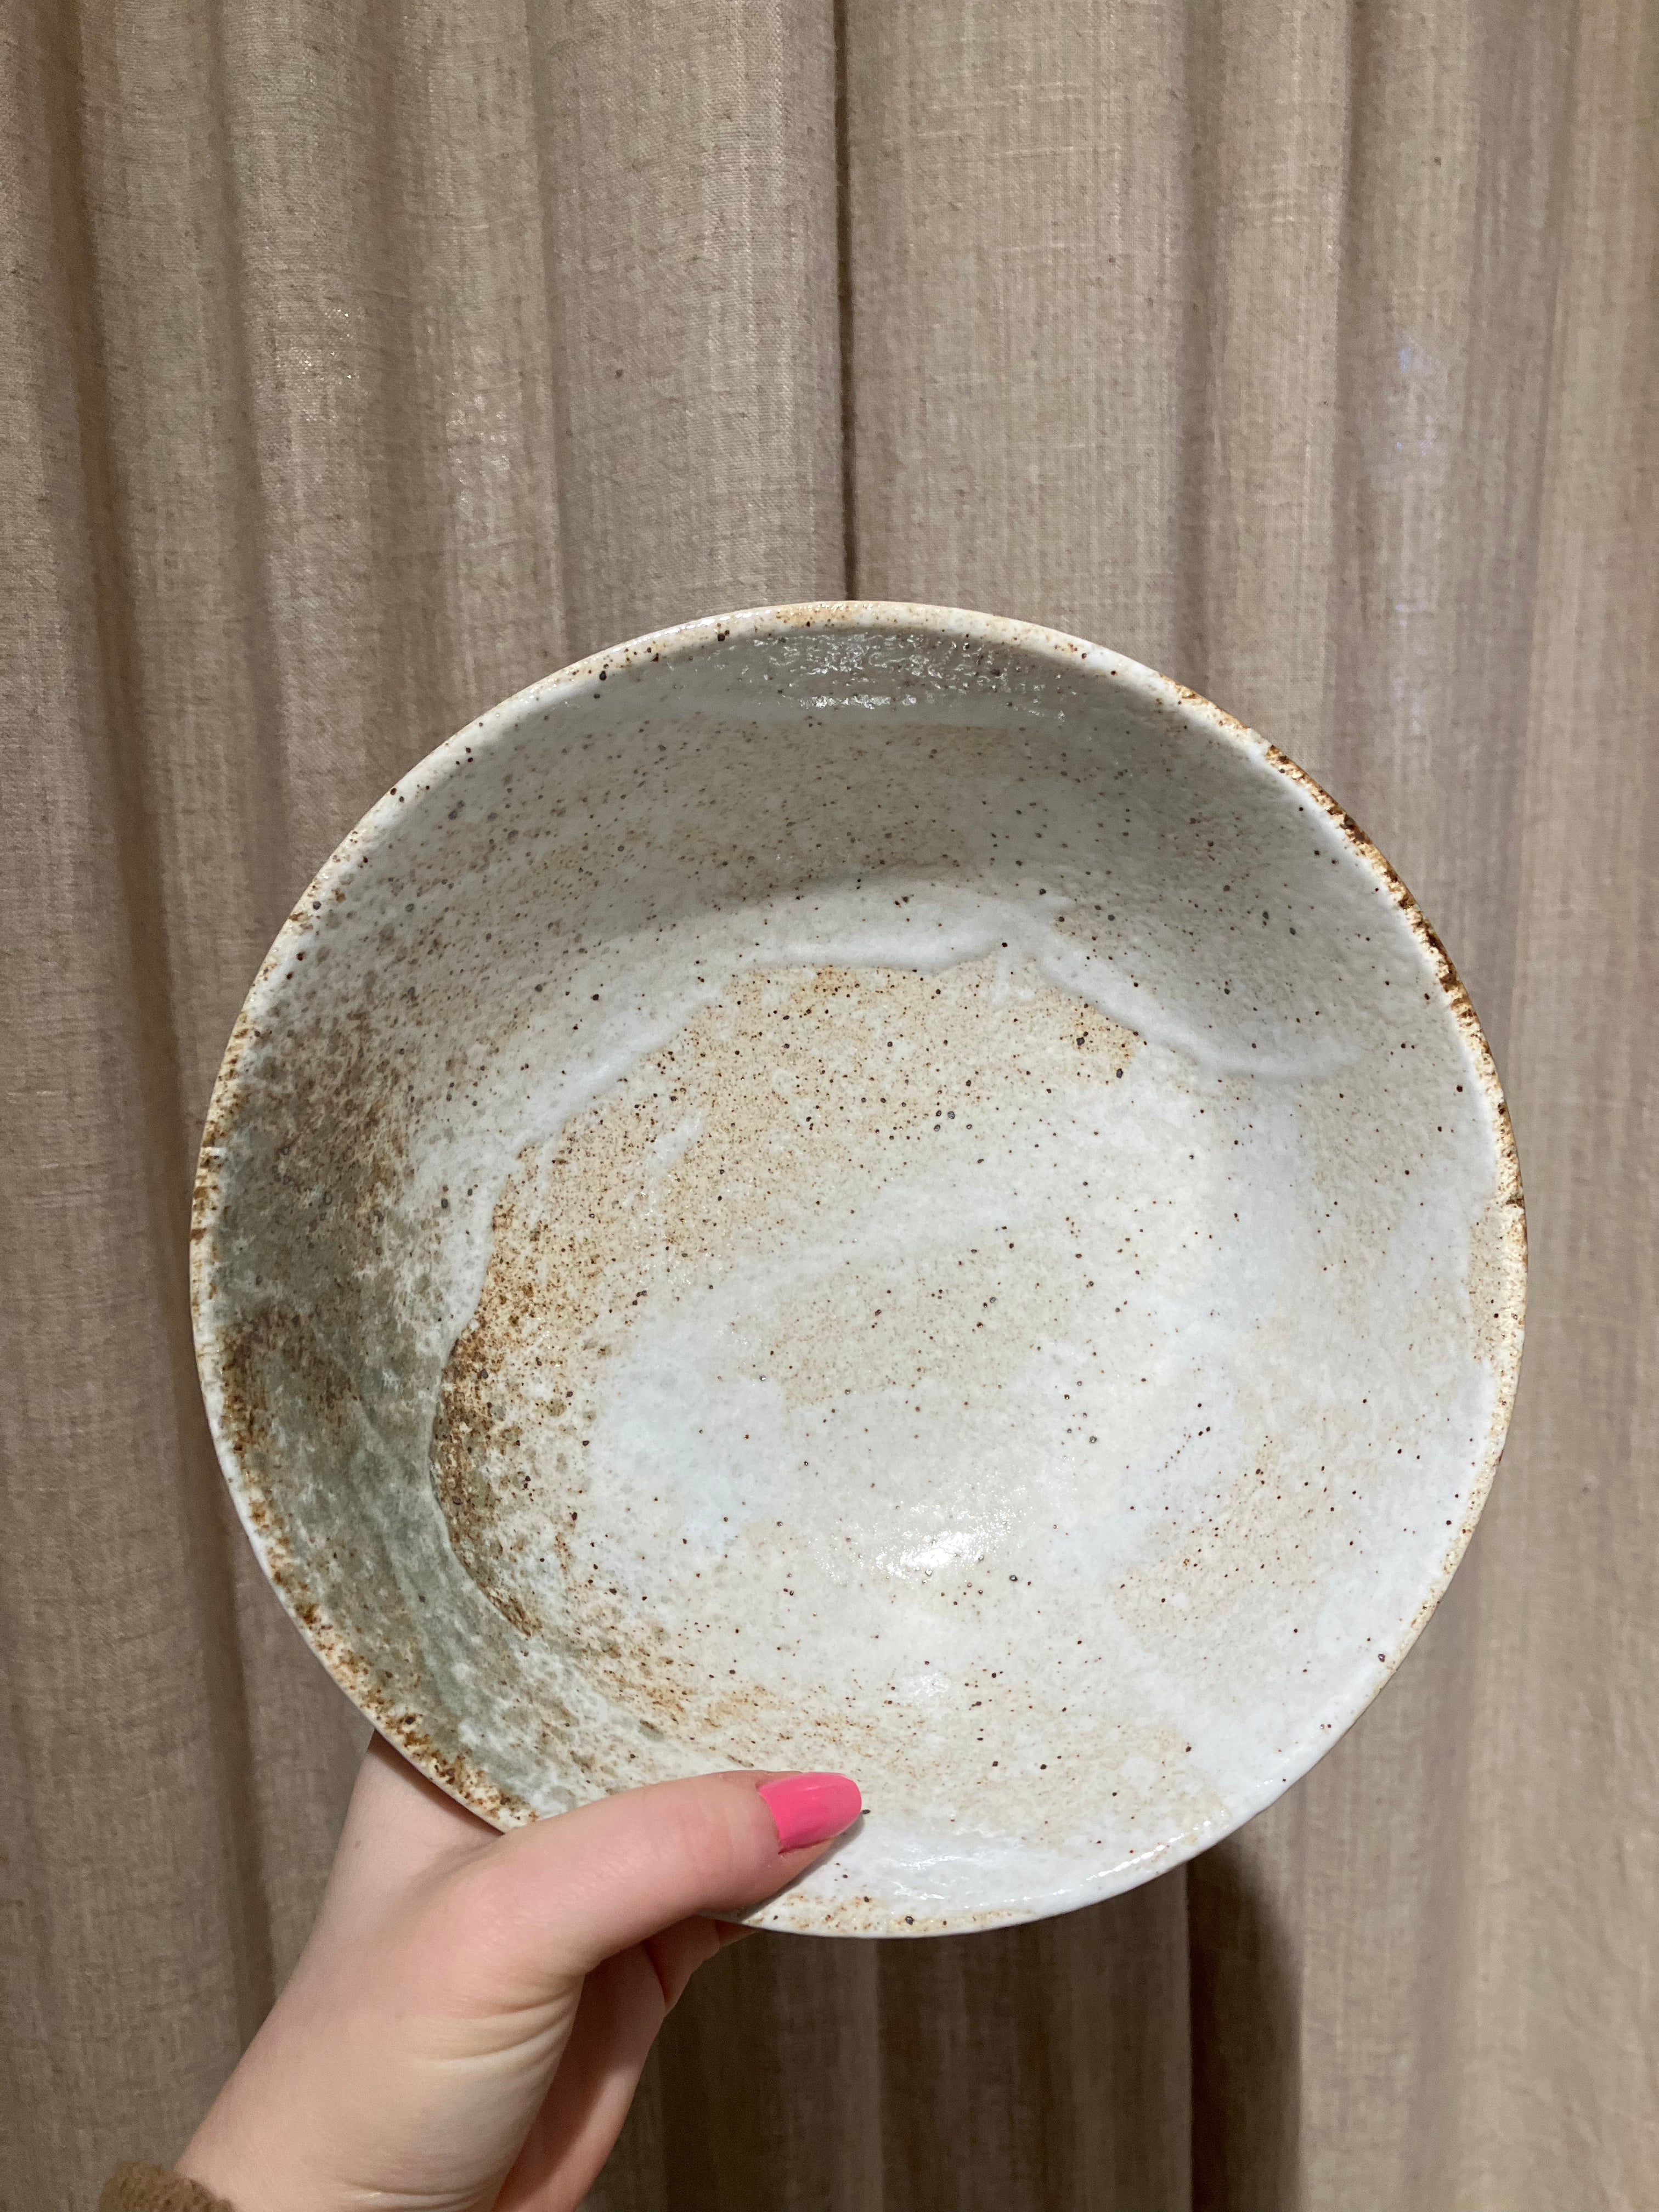 Ramen bowl with beige, brown and green glaze